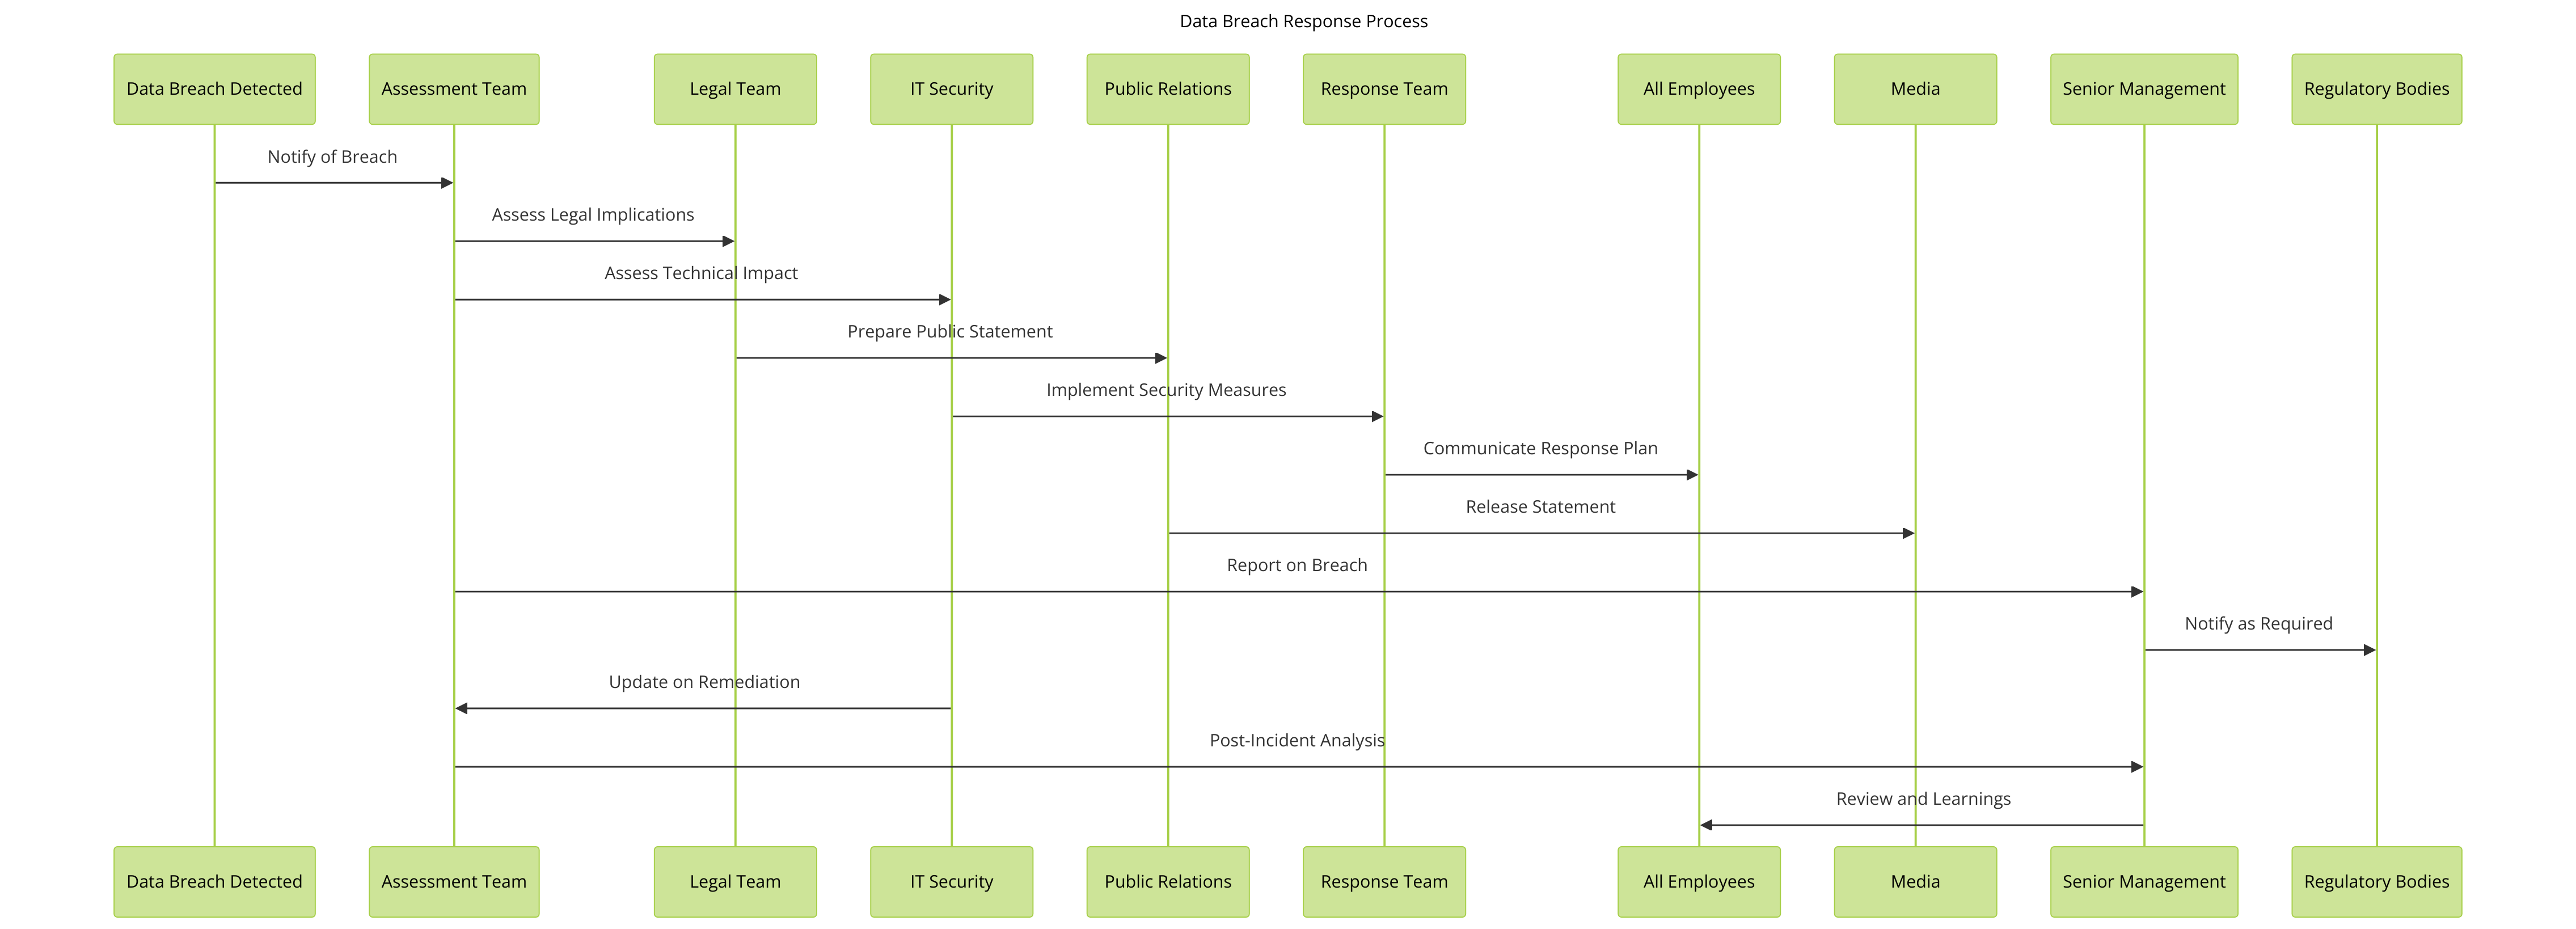 Sequence diagram of the Data Breach Response Process